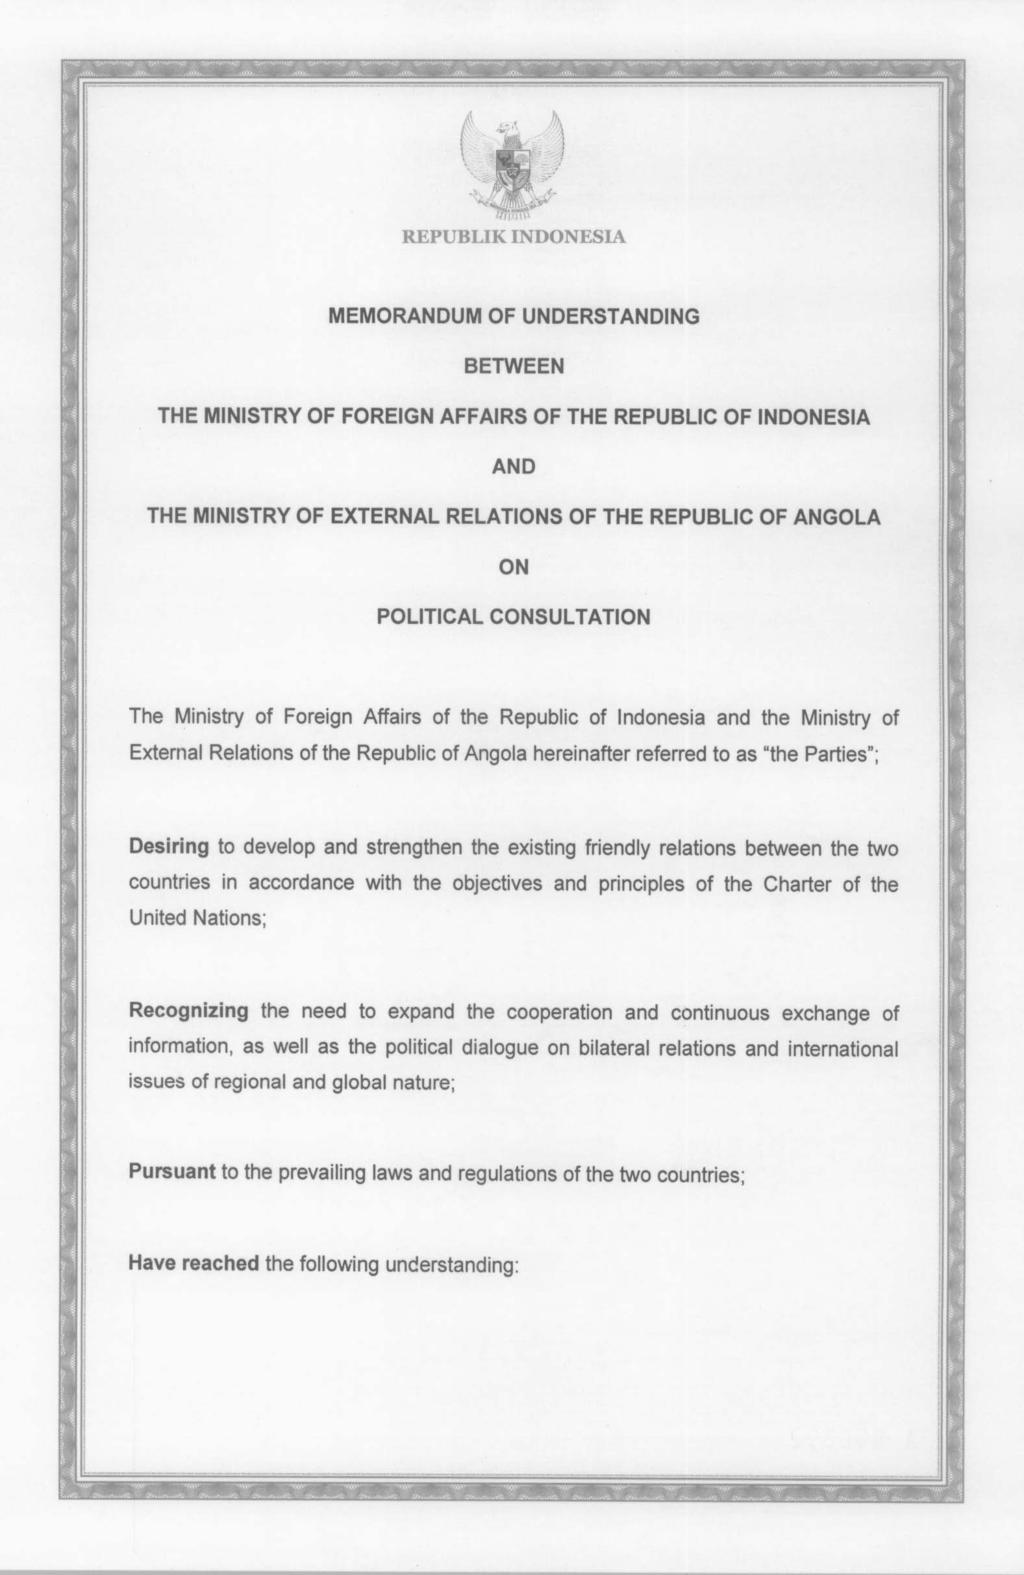 MEMORANDUM OF UNDERSTANDING BETWEEN THE MINISTRY OF FOREIGN AFFAIRS OF THE REPUBLIC OF INDONESIA AND THE MINISTRY OF EXTERNAL RELATIONS OF THE REPUBLIC OF ANGOLA ON POLITICAL CONSULTATION The